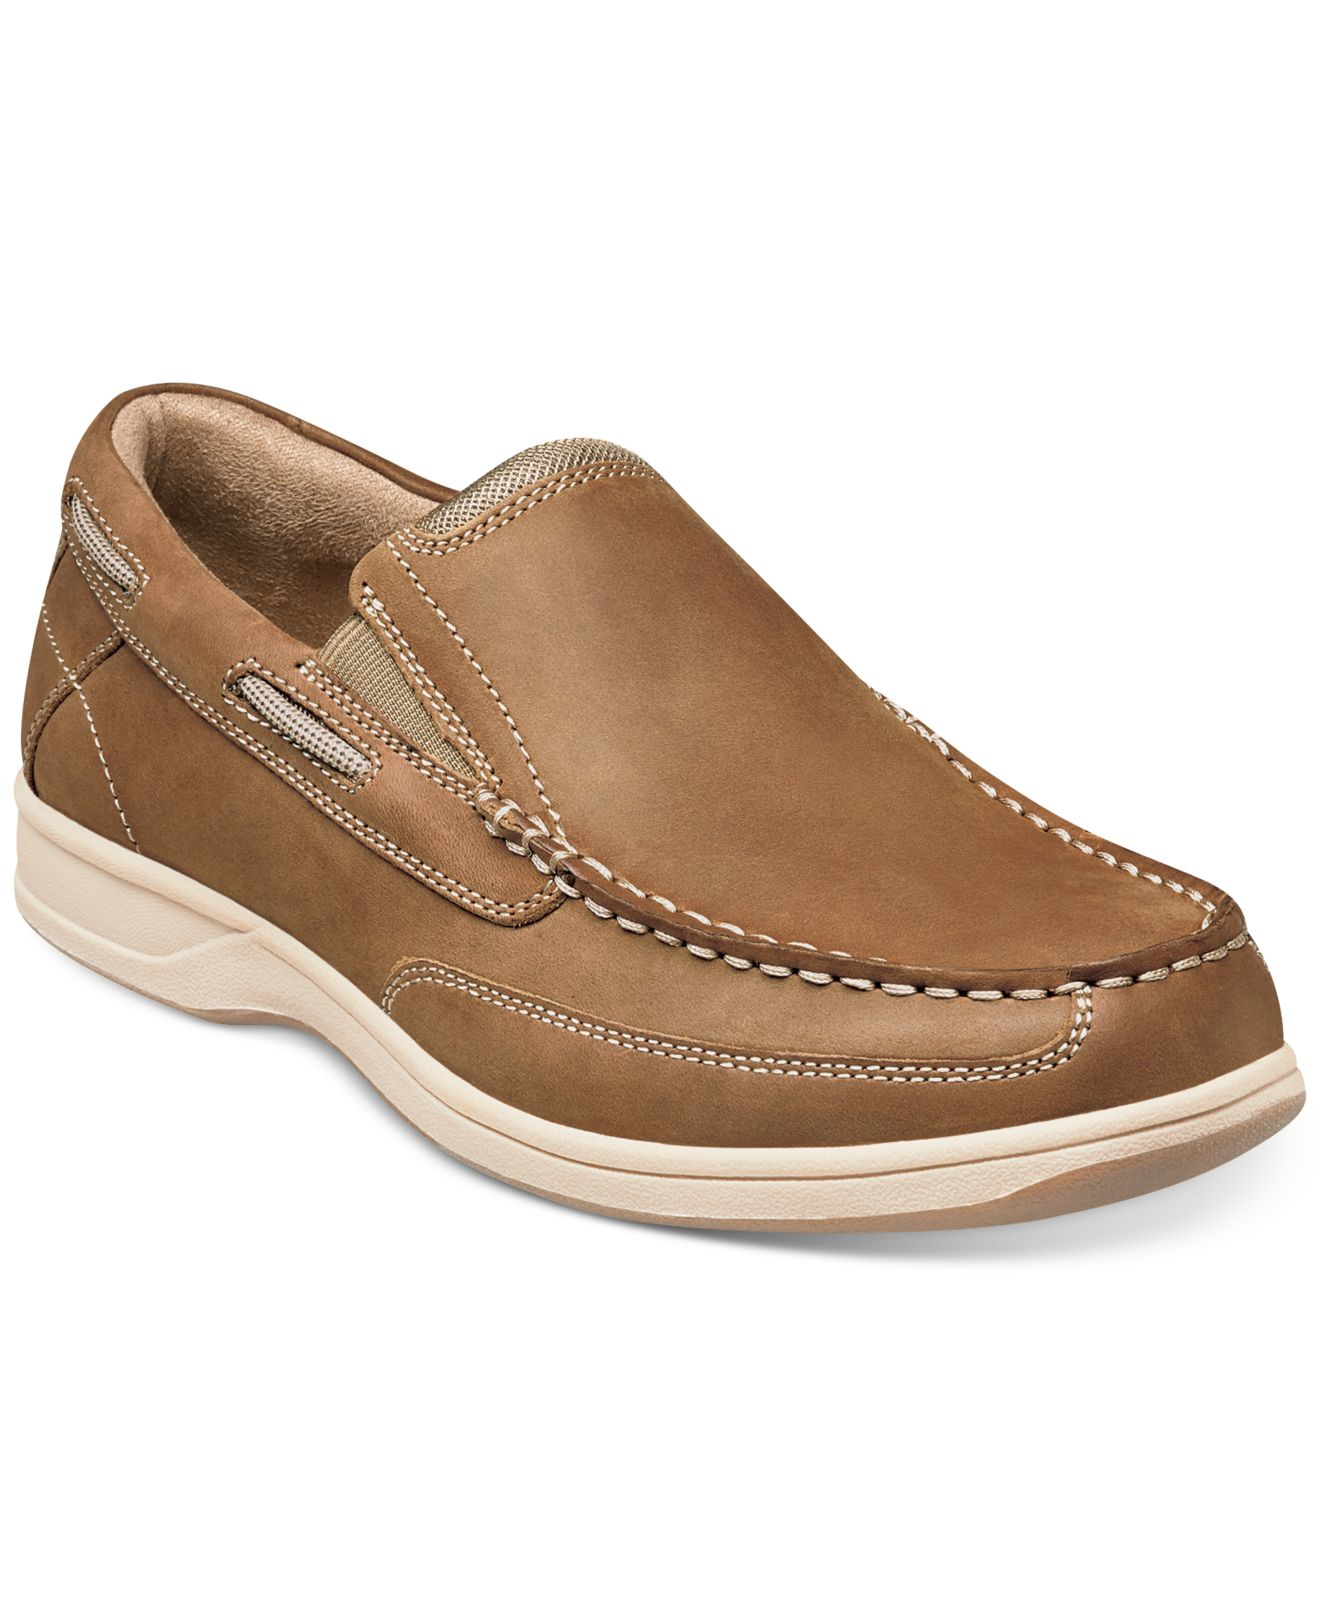 Lyst - Florsheim Men's Lakeside Loafers in Brown for Men